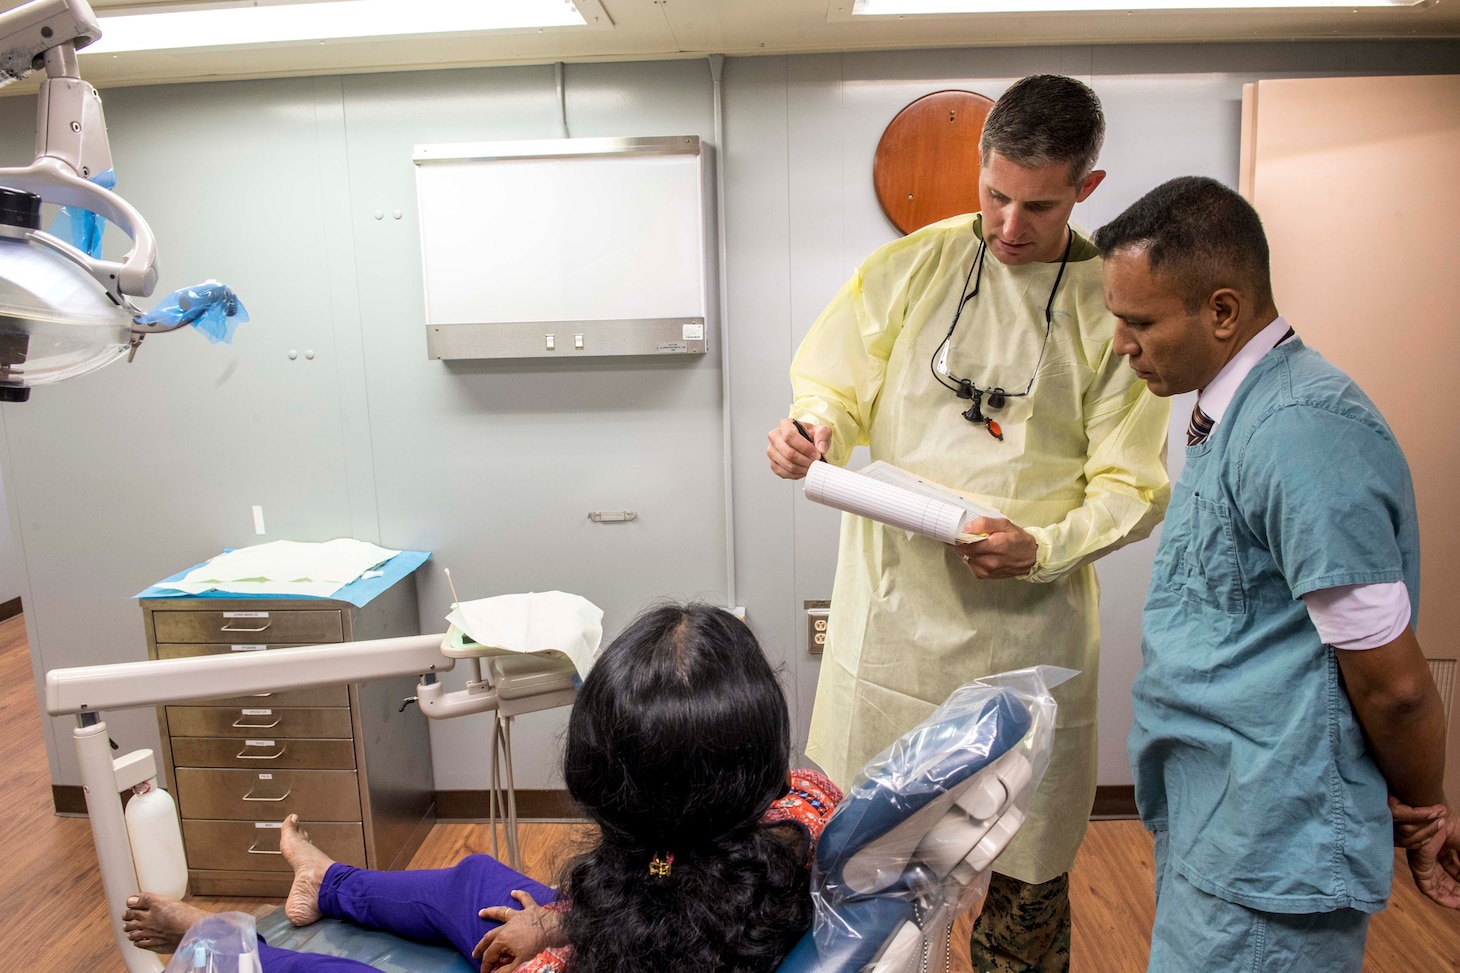 Lt. Lee Atkinson (left), a native of Yuma, Ariz., assigned to Military Sealift Command hospital ship USNS Mercy (T-AH 19) for Pacific Partnership 2018 (PP18), and Dr. Ehiya Mohamed Rizwan (right), a Sri Lankan dentist, go over a patient's care plan prior to performing a dental examination aboard Mercy. PP18's mission is to work collectively with host and partner nations to enhance regional interoperability and disaster response capabilities, increase stability and security in the region, and foster new and enduring friendships across the Indo-Pacific Region. Pacific Partnership, now in its 13th iteration, is the largest annual multinational humanitarian assistance and disaster relief preparedness mission conducted in the Indo-Pacific.